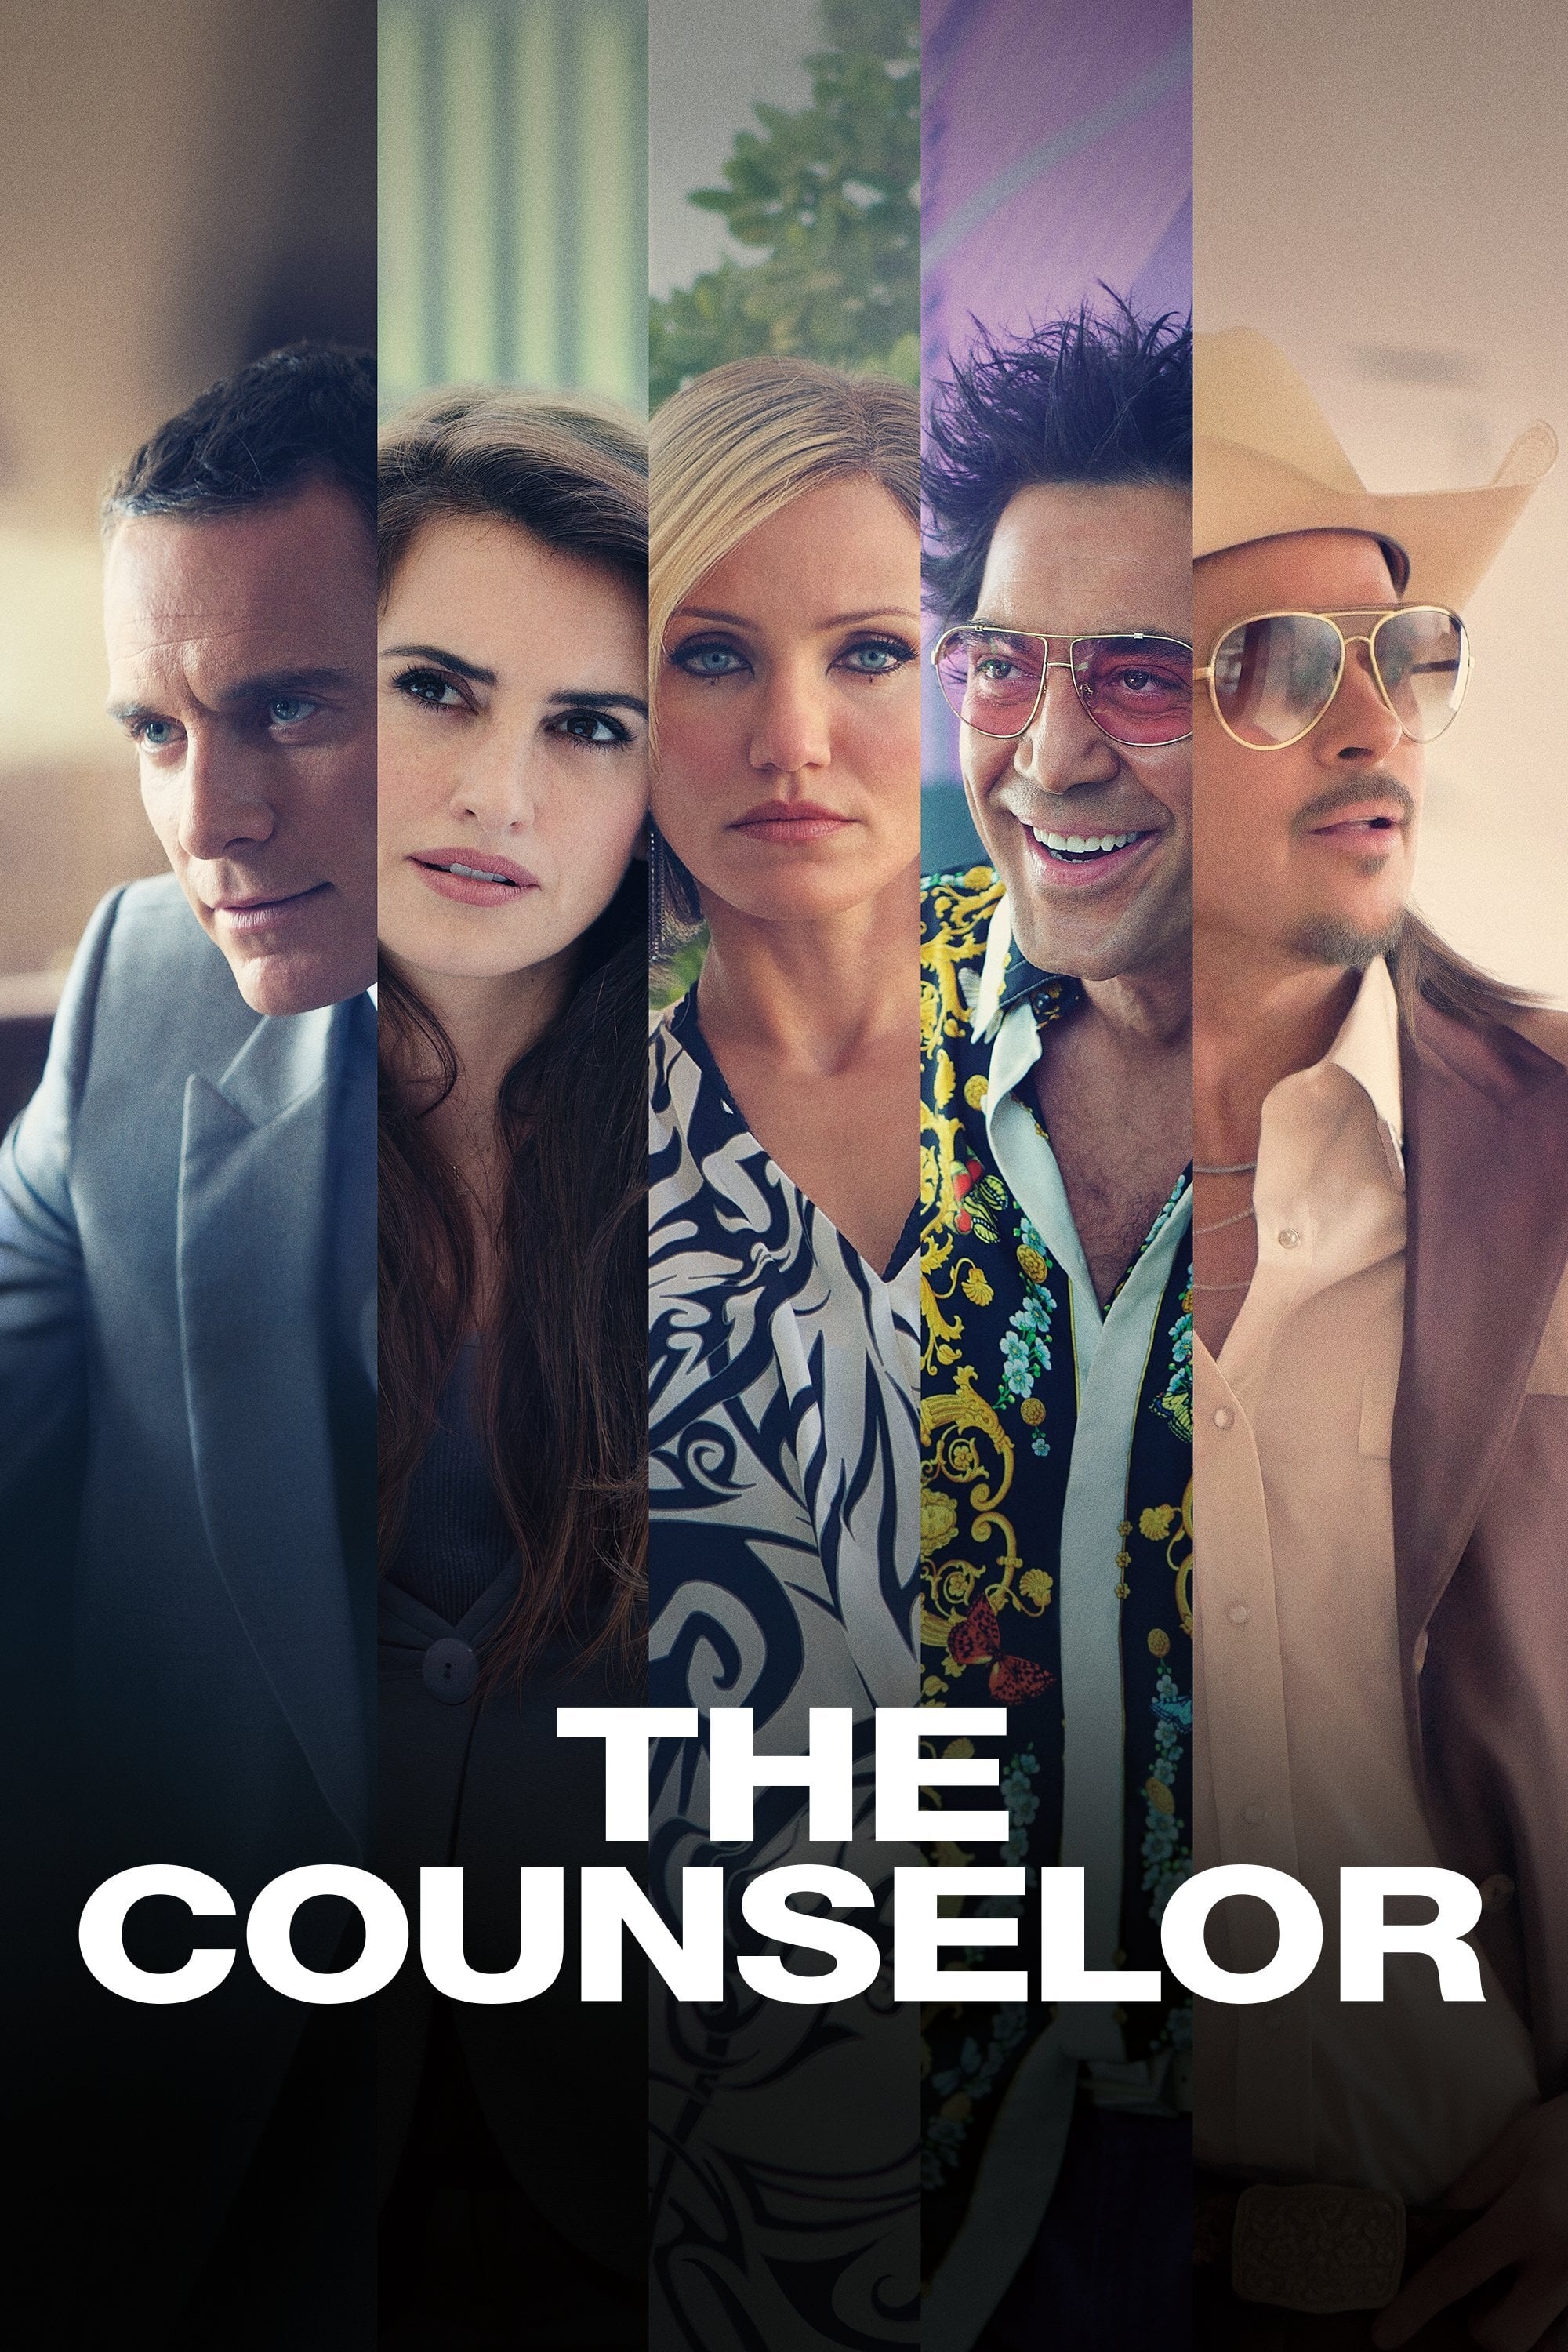 The Counselor (2013)